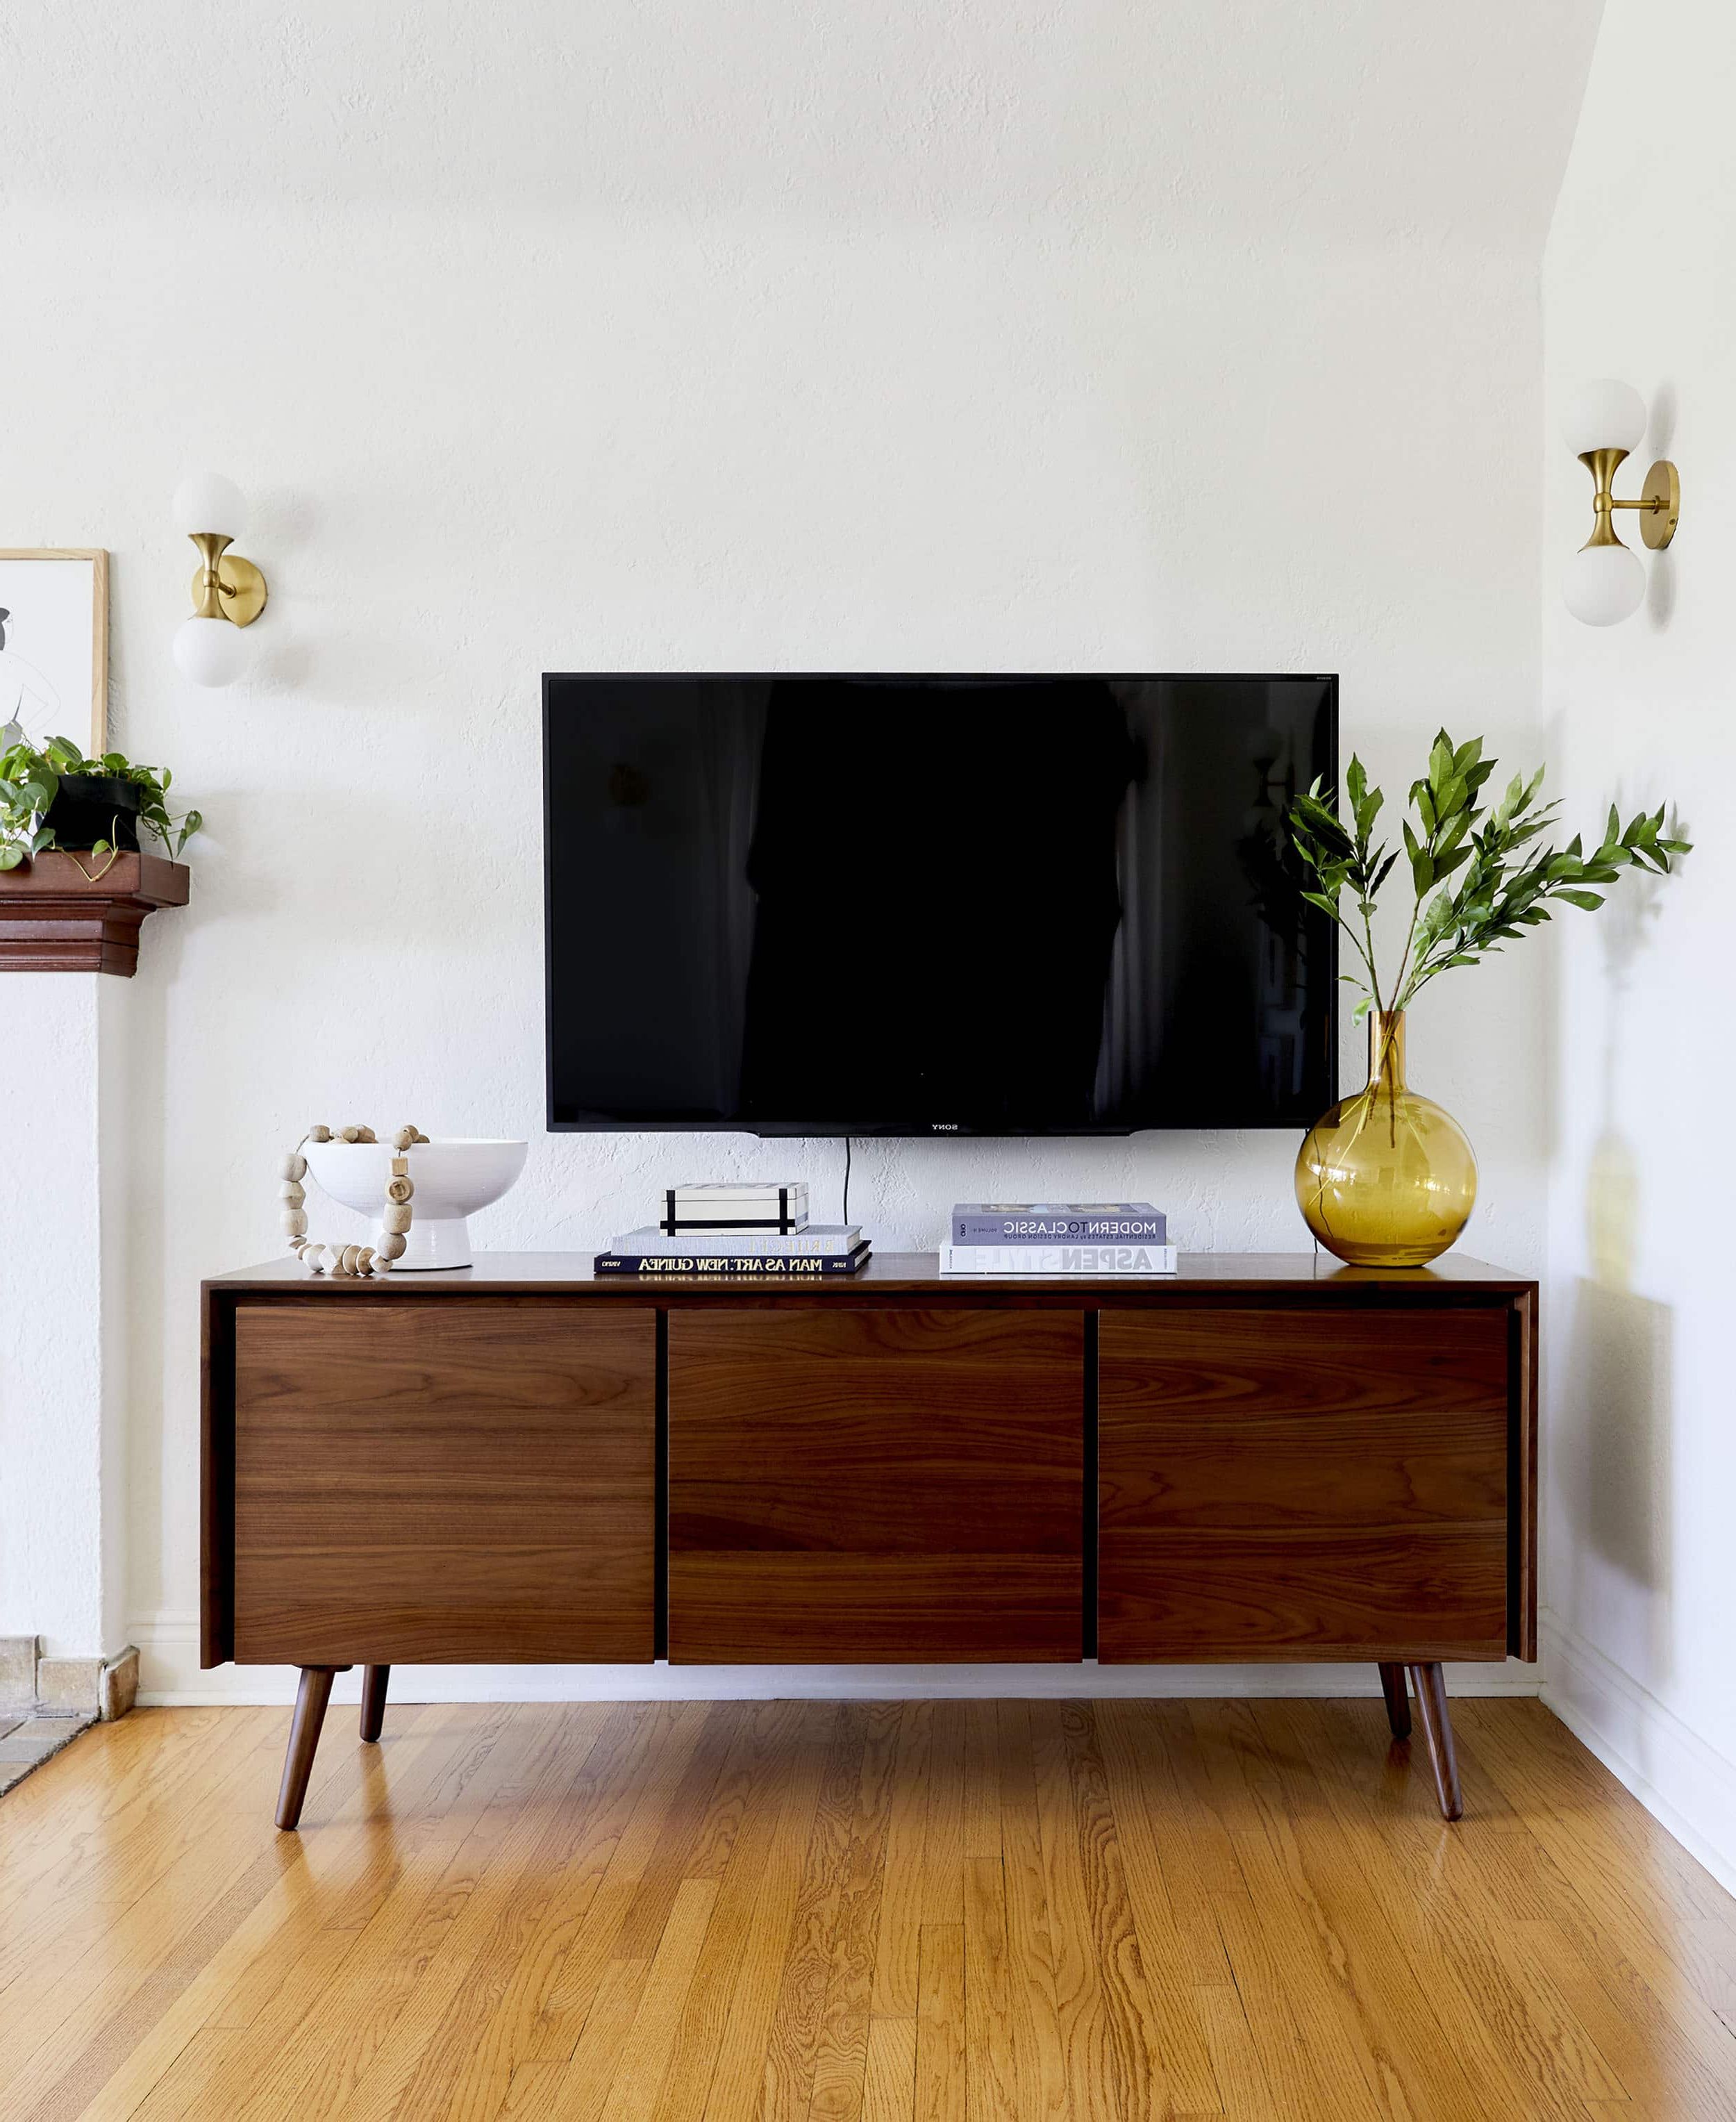 4 Ways To Style That Credenza For "real Life" + Shop Our Favorite Credenzas  – Emily Henderson Within Credenzas For Living Room (View 4 of 20)